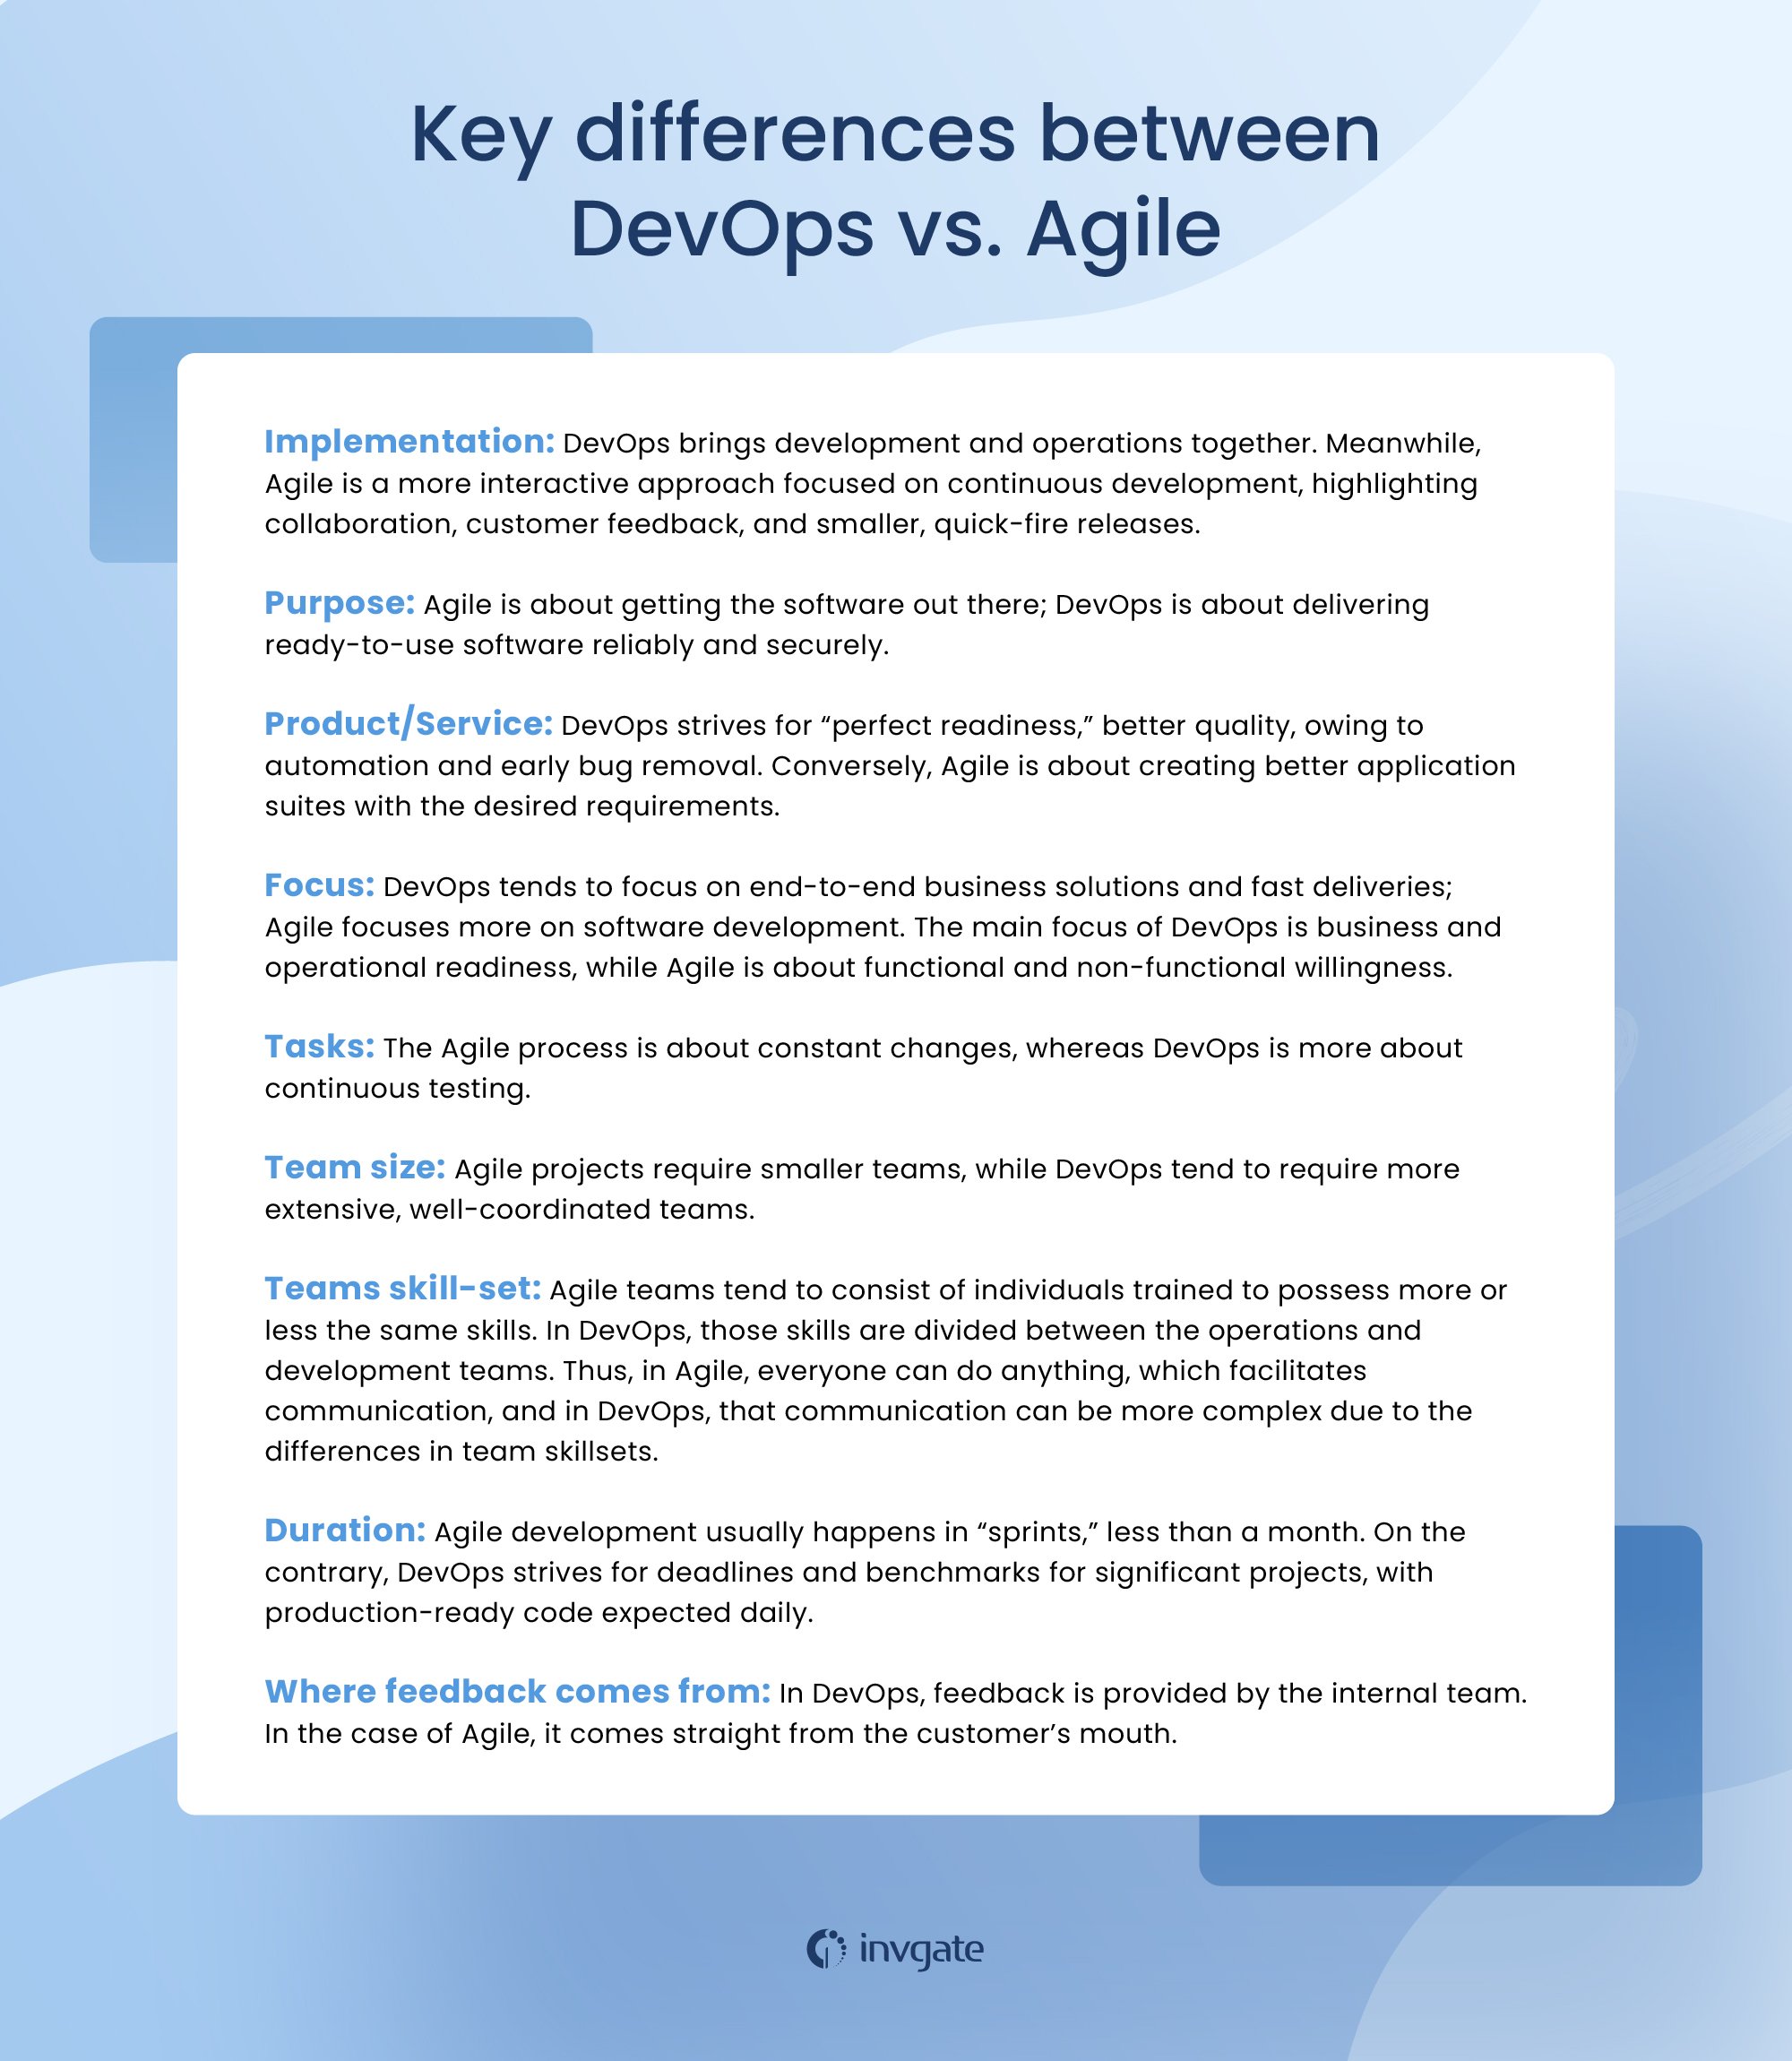 9 key differences between DevOps and Agile.